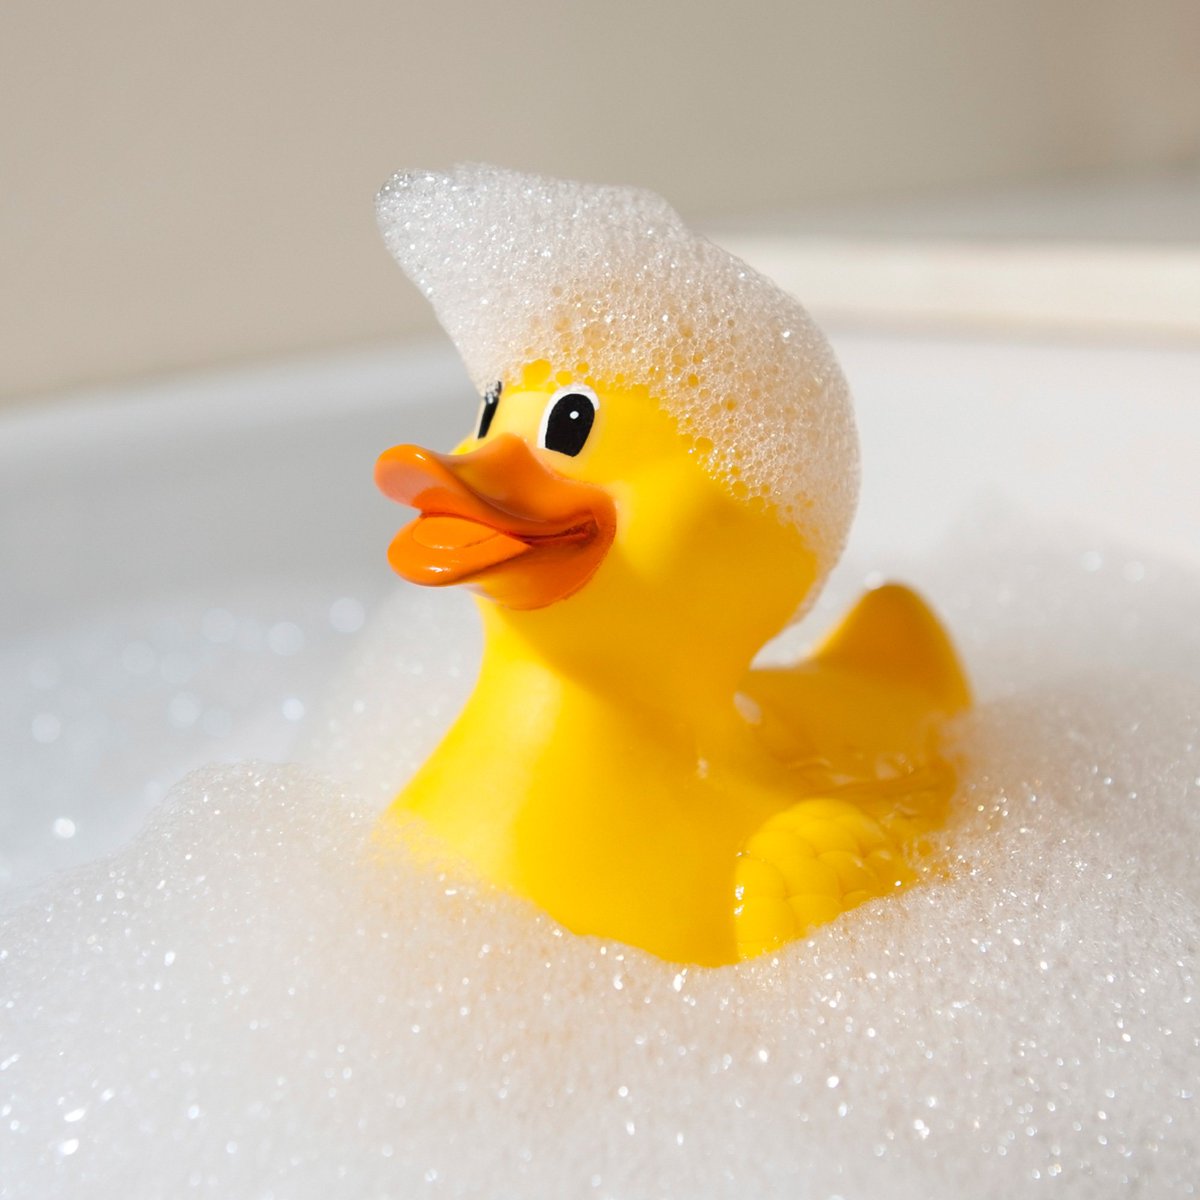 Happy #BubbleBathDay! How are you taking a little “you” time today?